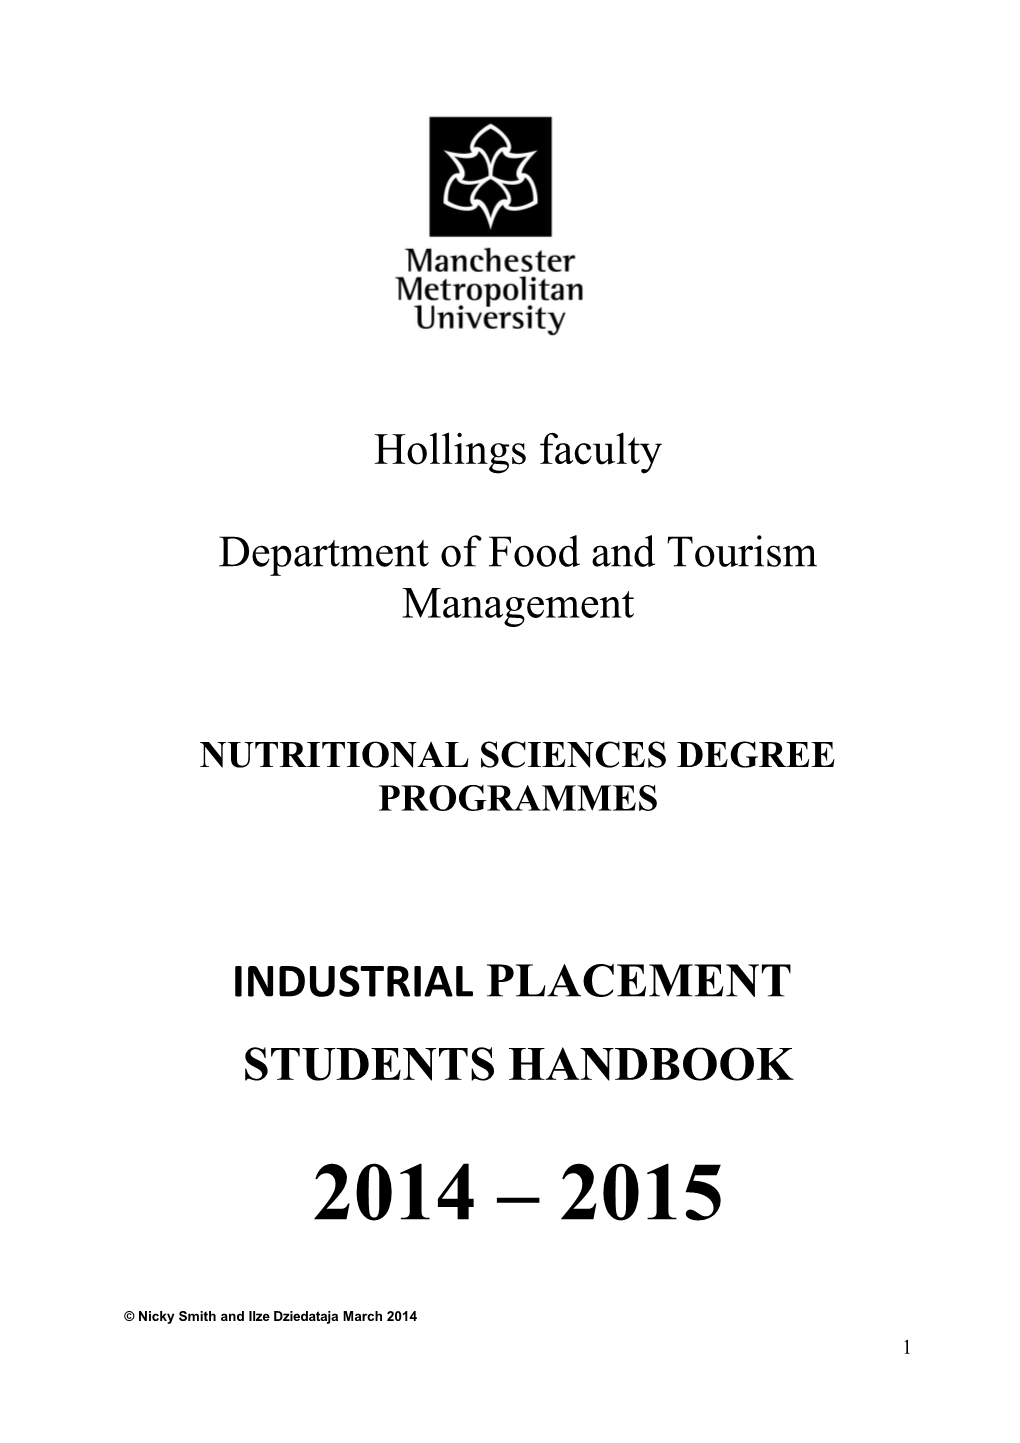 Department of Food and Tourism Management